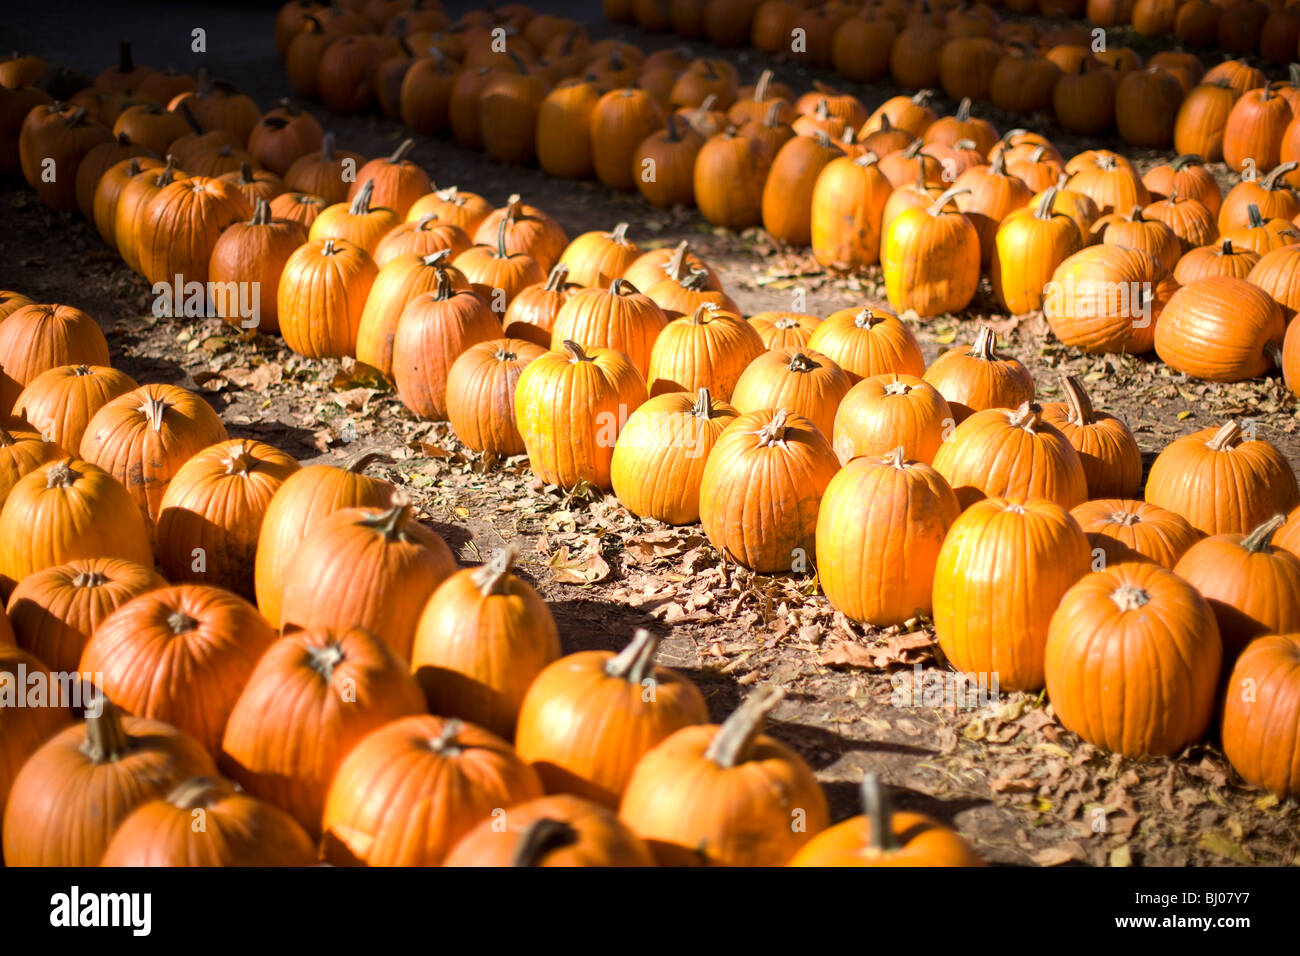 Rows of pumpkins at the pumpkin patch. Stock Photo